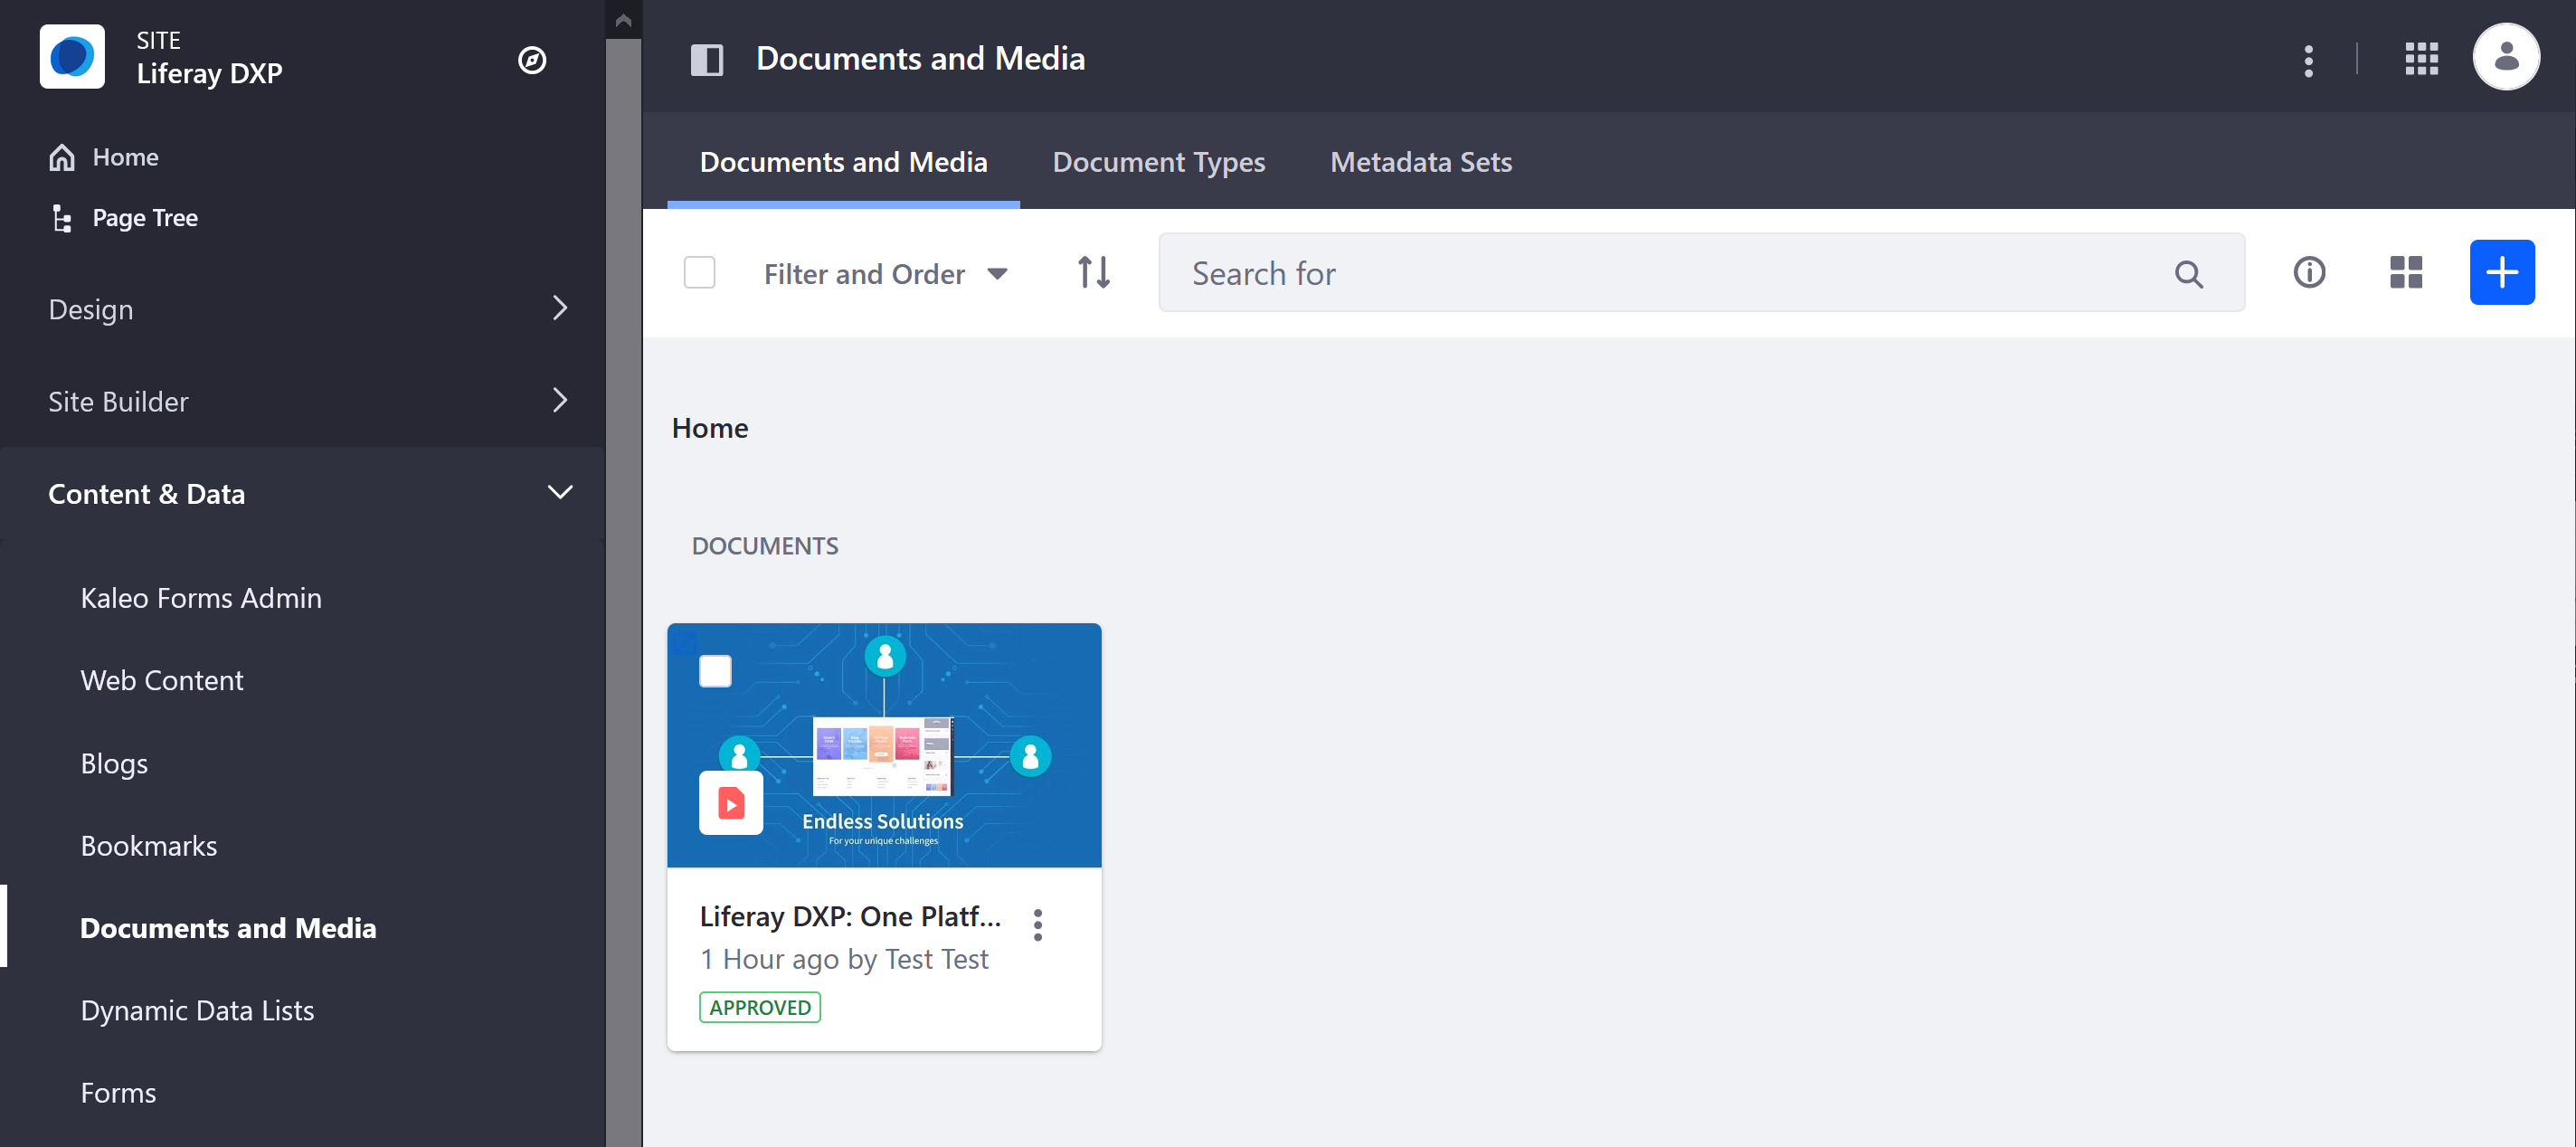 View and manage external video shortcuts in Documents and Media.